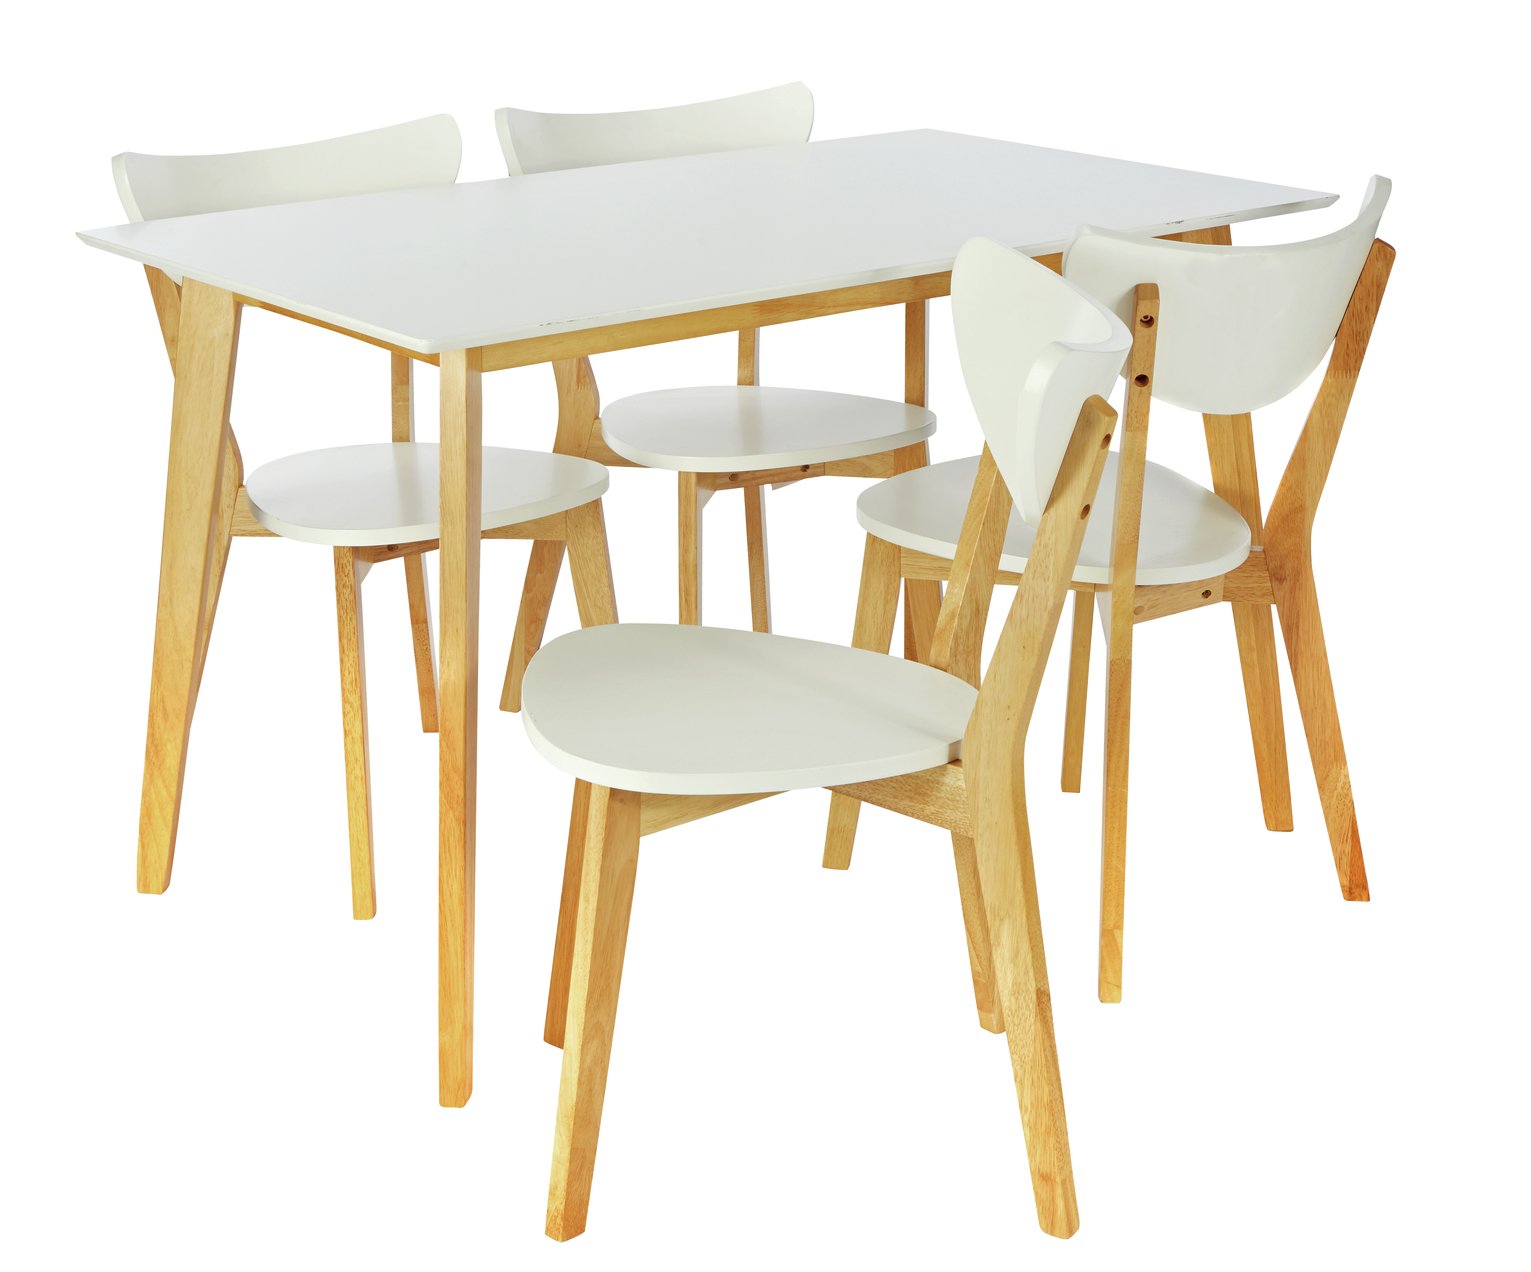 Argos Home Harlow Dining Table & 4 White Chairs